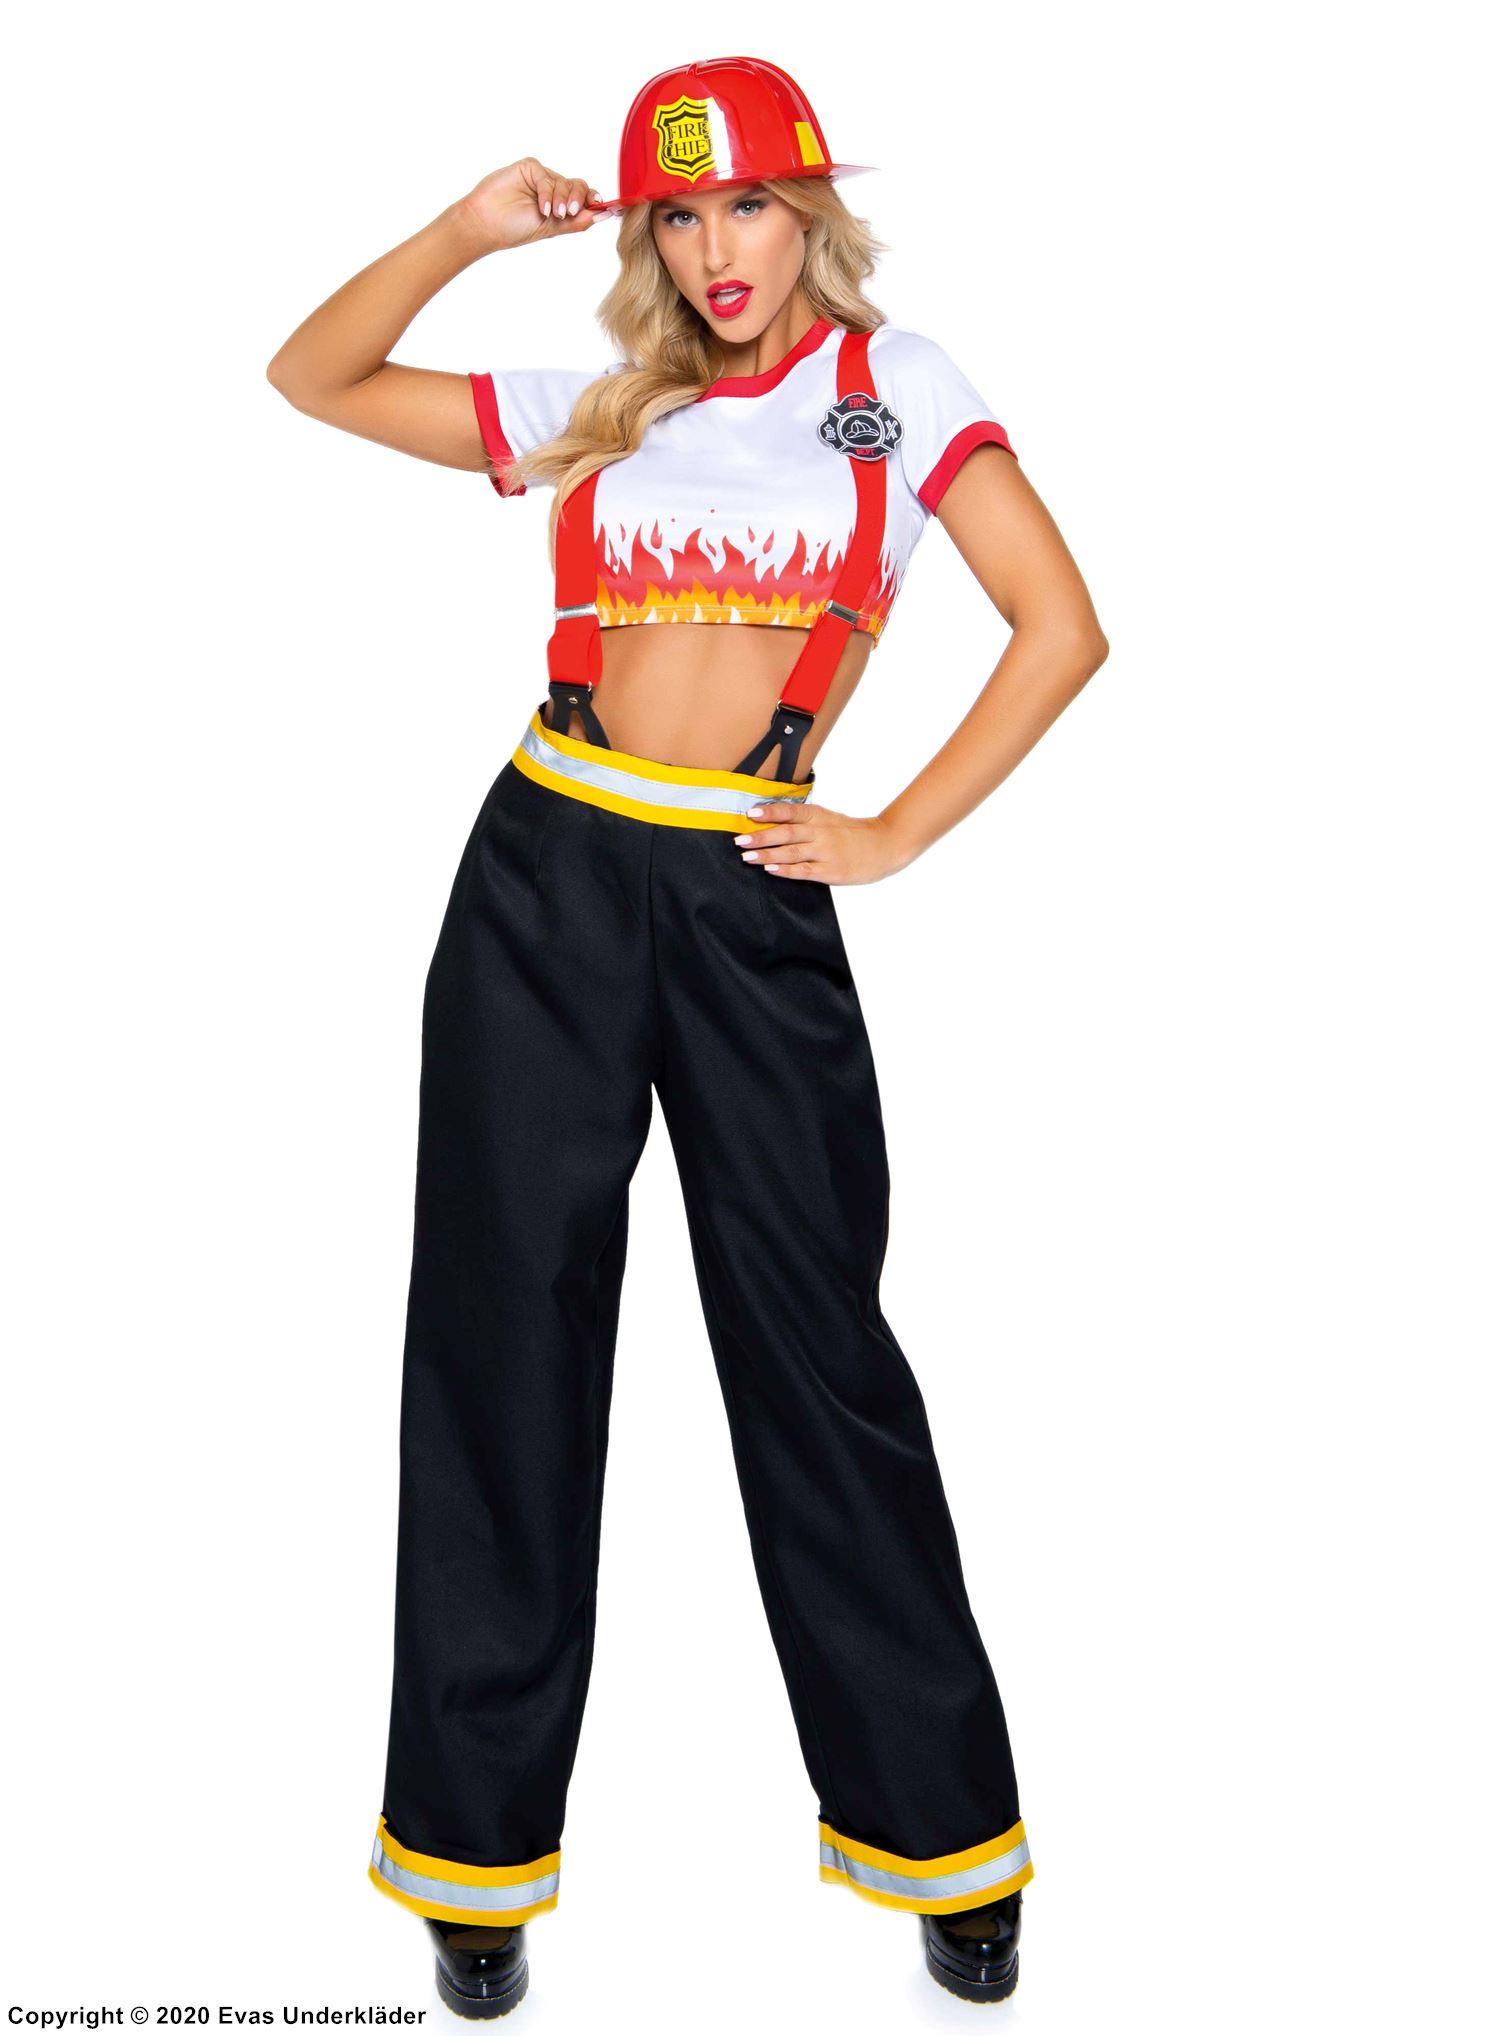 Female fire fighter, costume top and pants, suspenders, flames